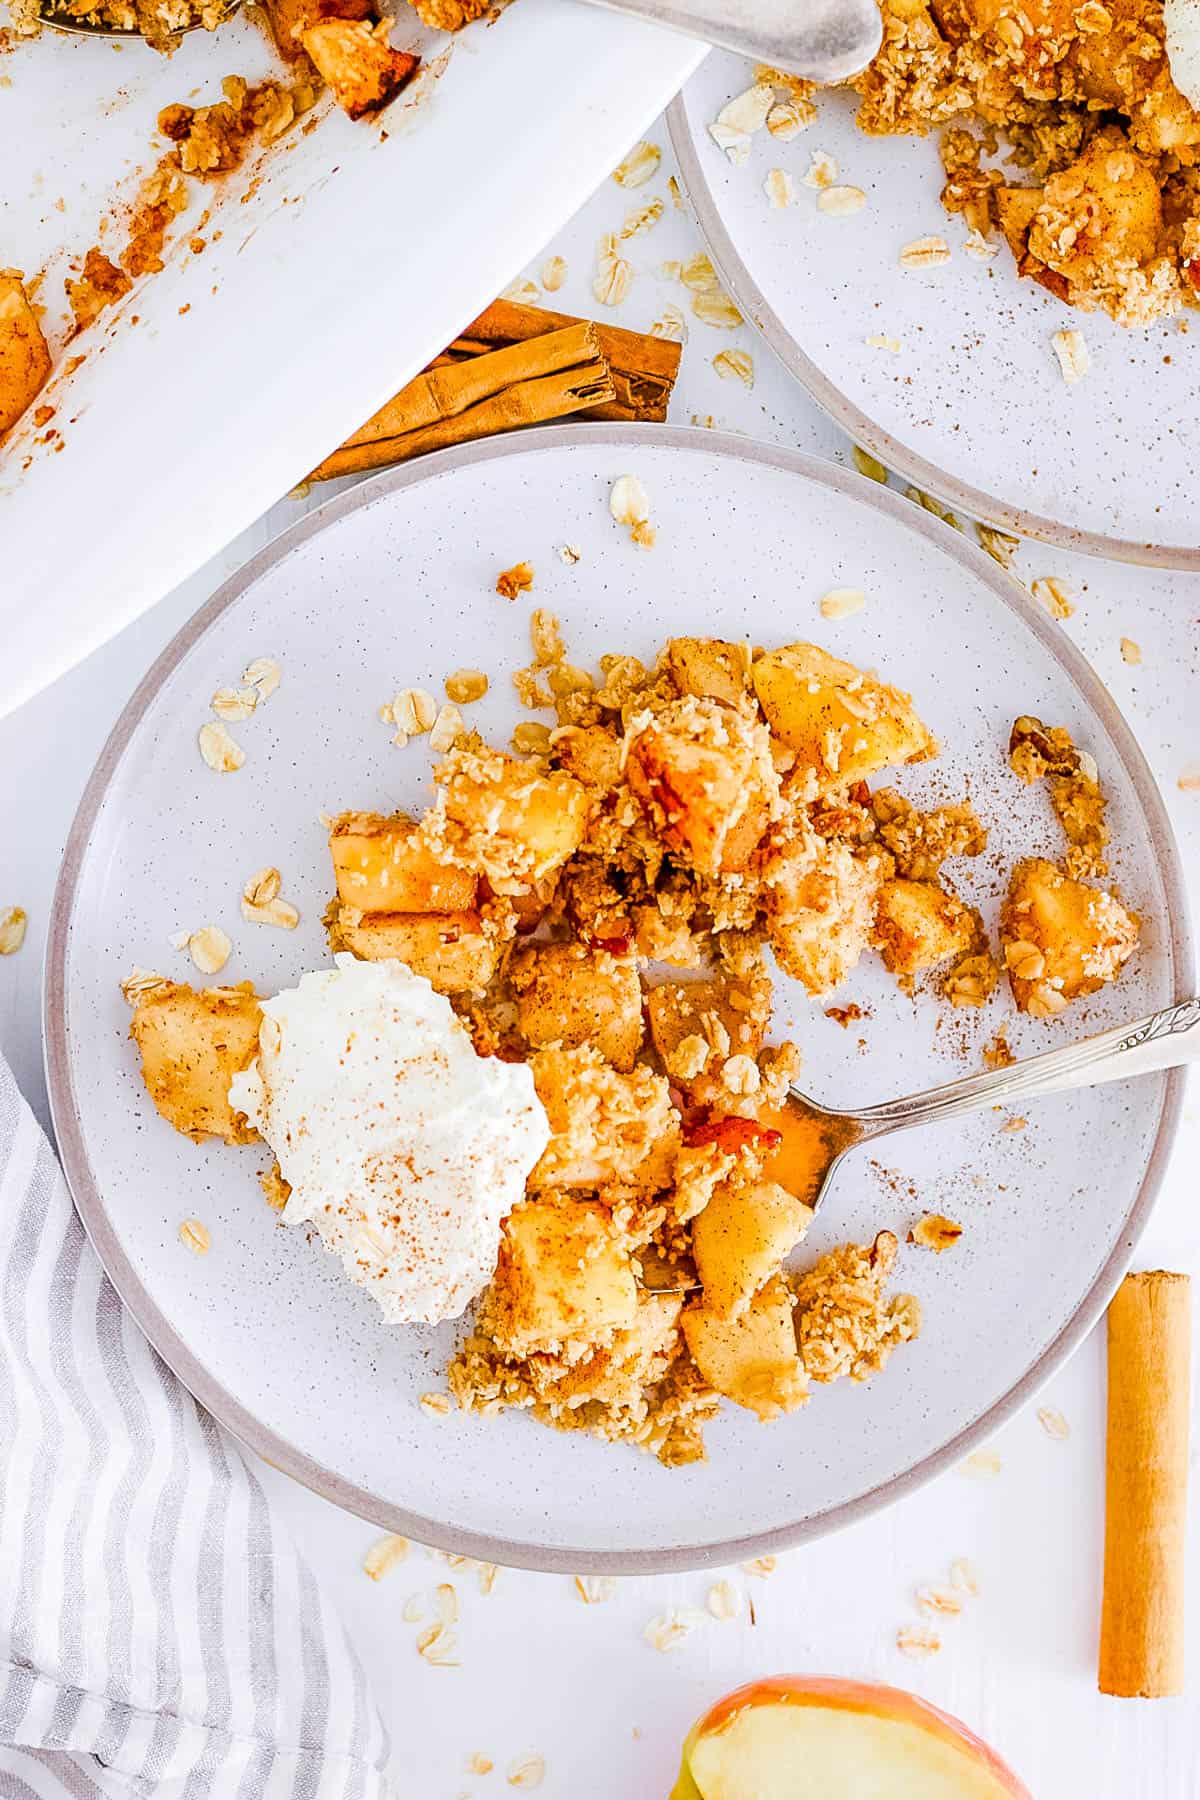 healthy, easy, gluten free, dairy free, vegan apple crumble recipe (apple crisp) on a plate with whipped cream